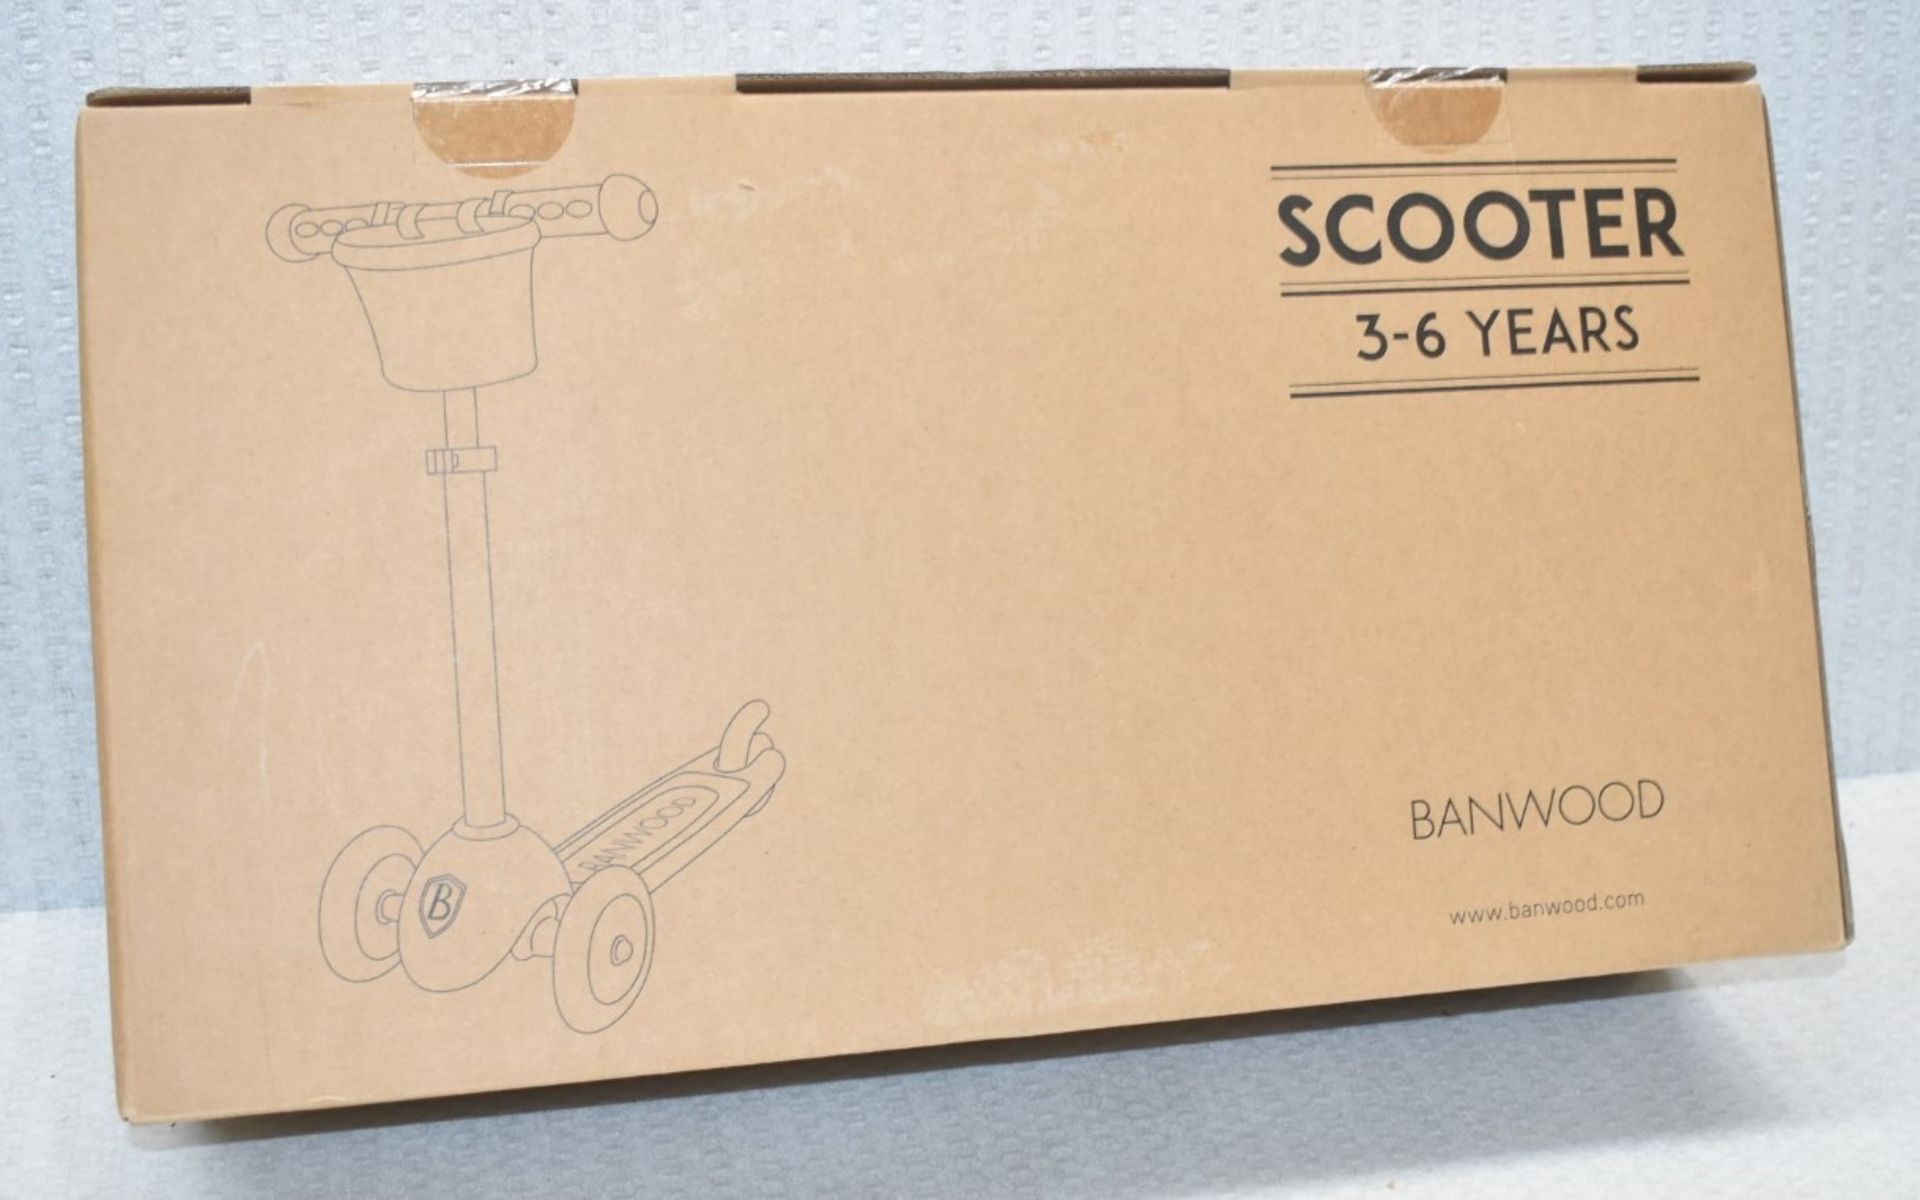 1 x BANWOOD Scooter Bike in Green - Original Price £119.00 - Boxed - Image 7 of 12